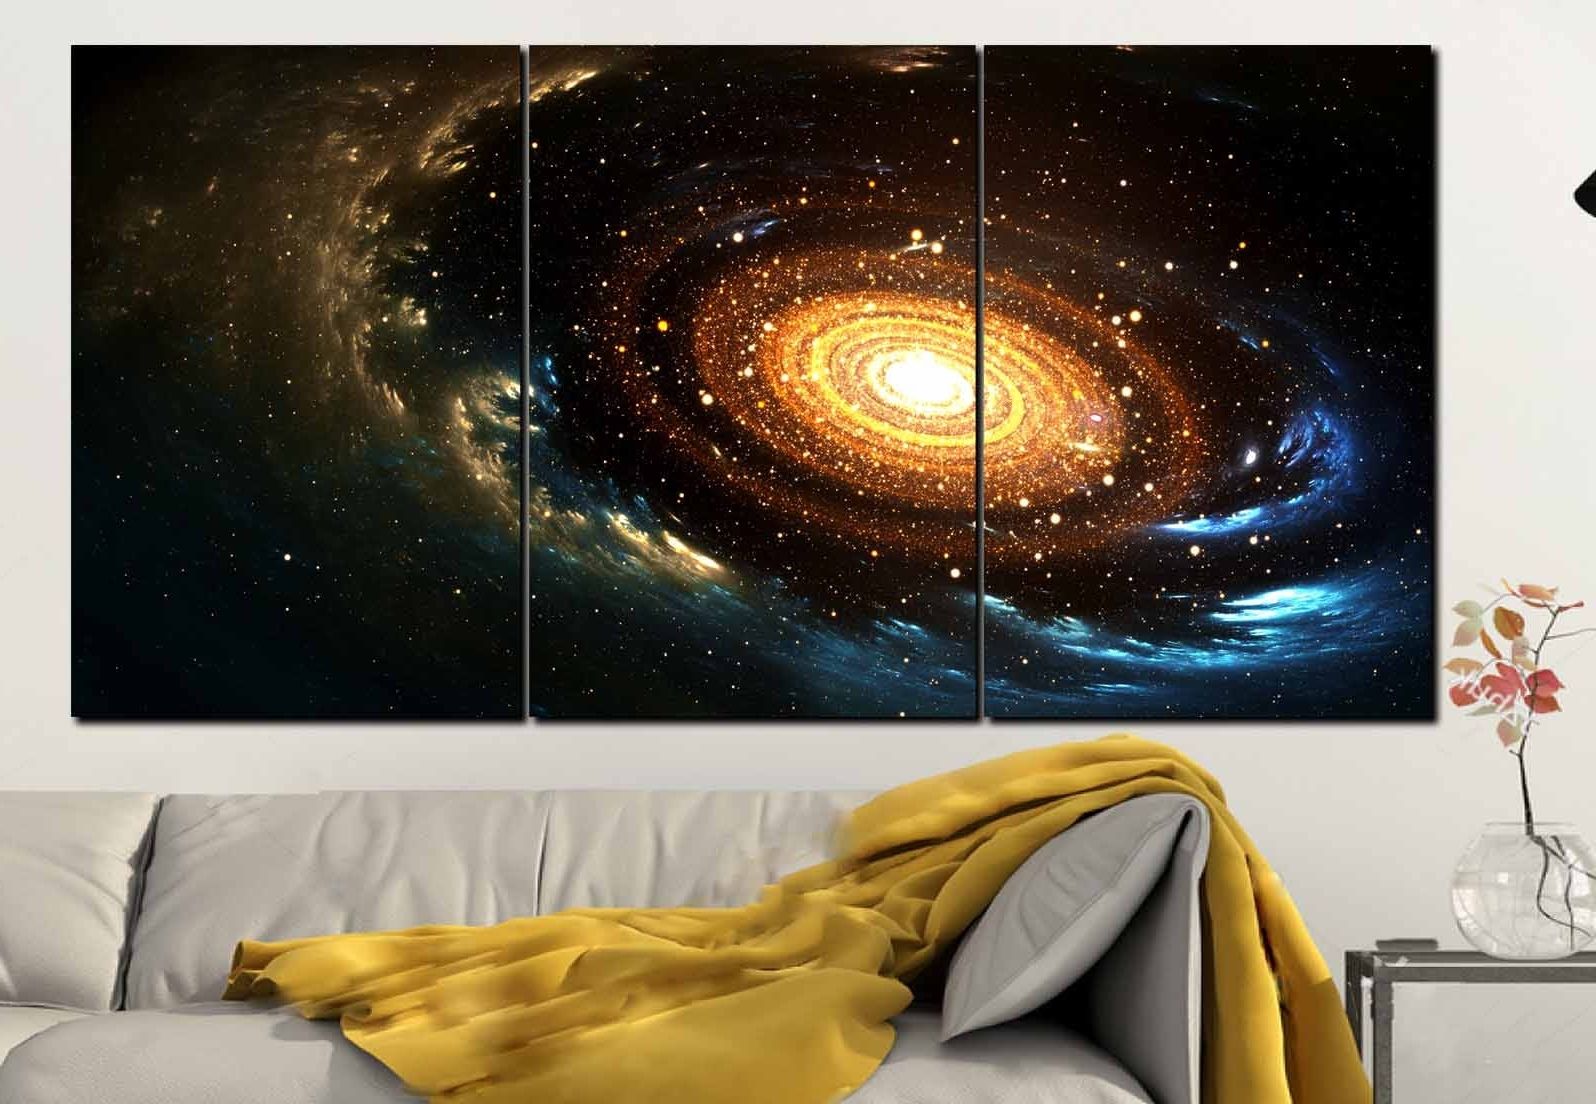 Outer Space Wall Art For Well Known Outer Space Spiral Galaxy And Stars Wall Art Canvas Print,space (View 7 of 15)